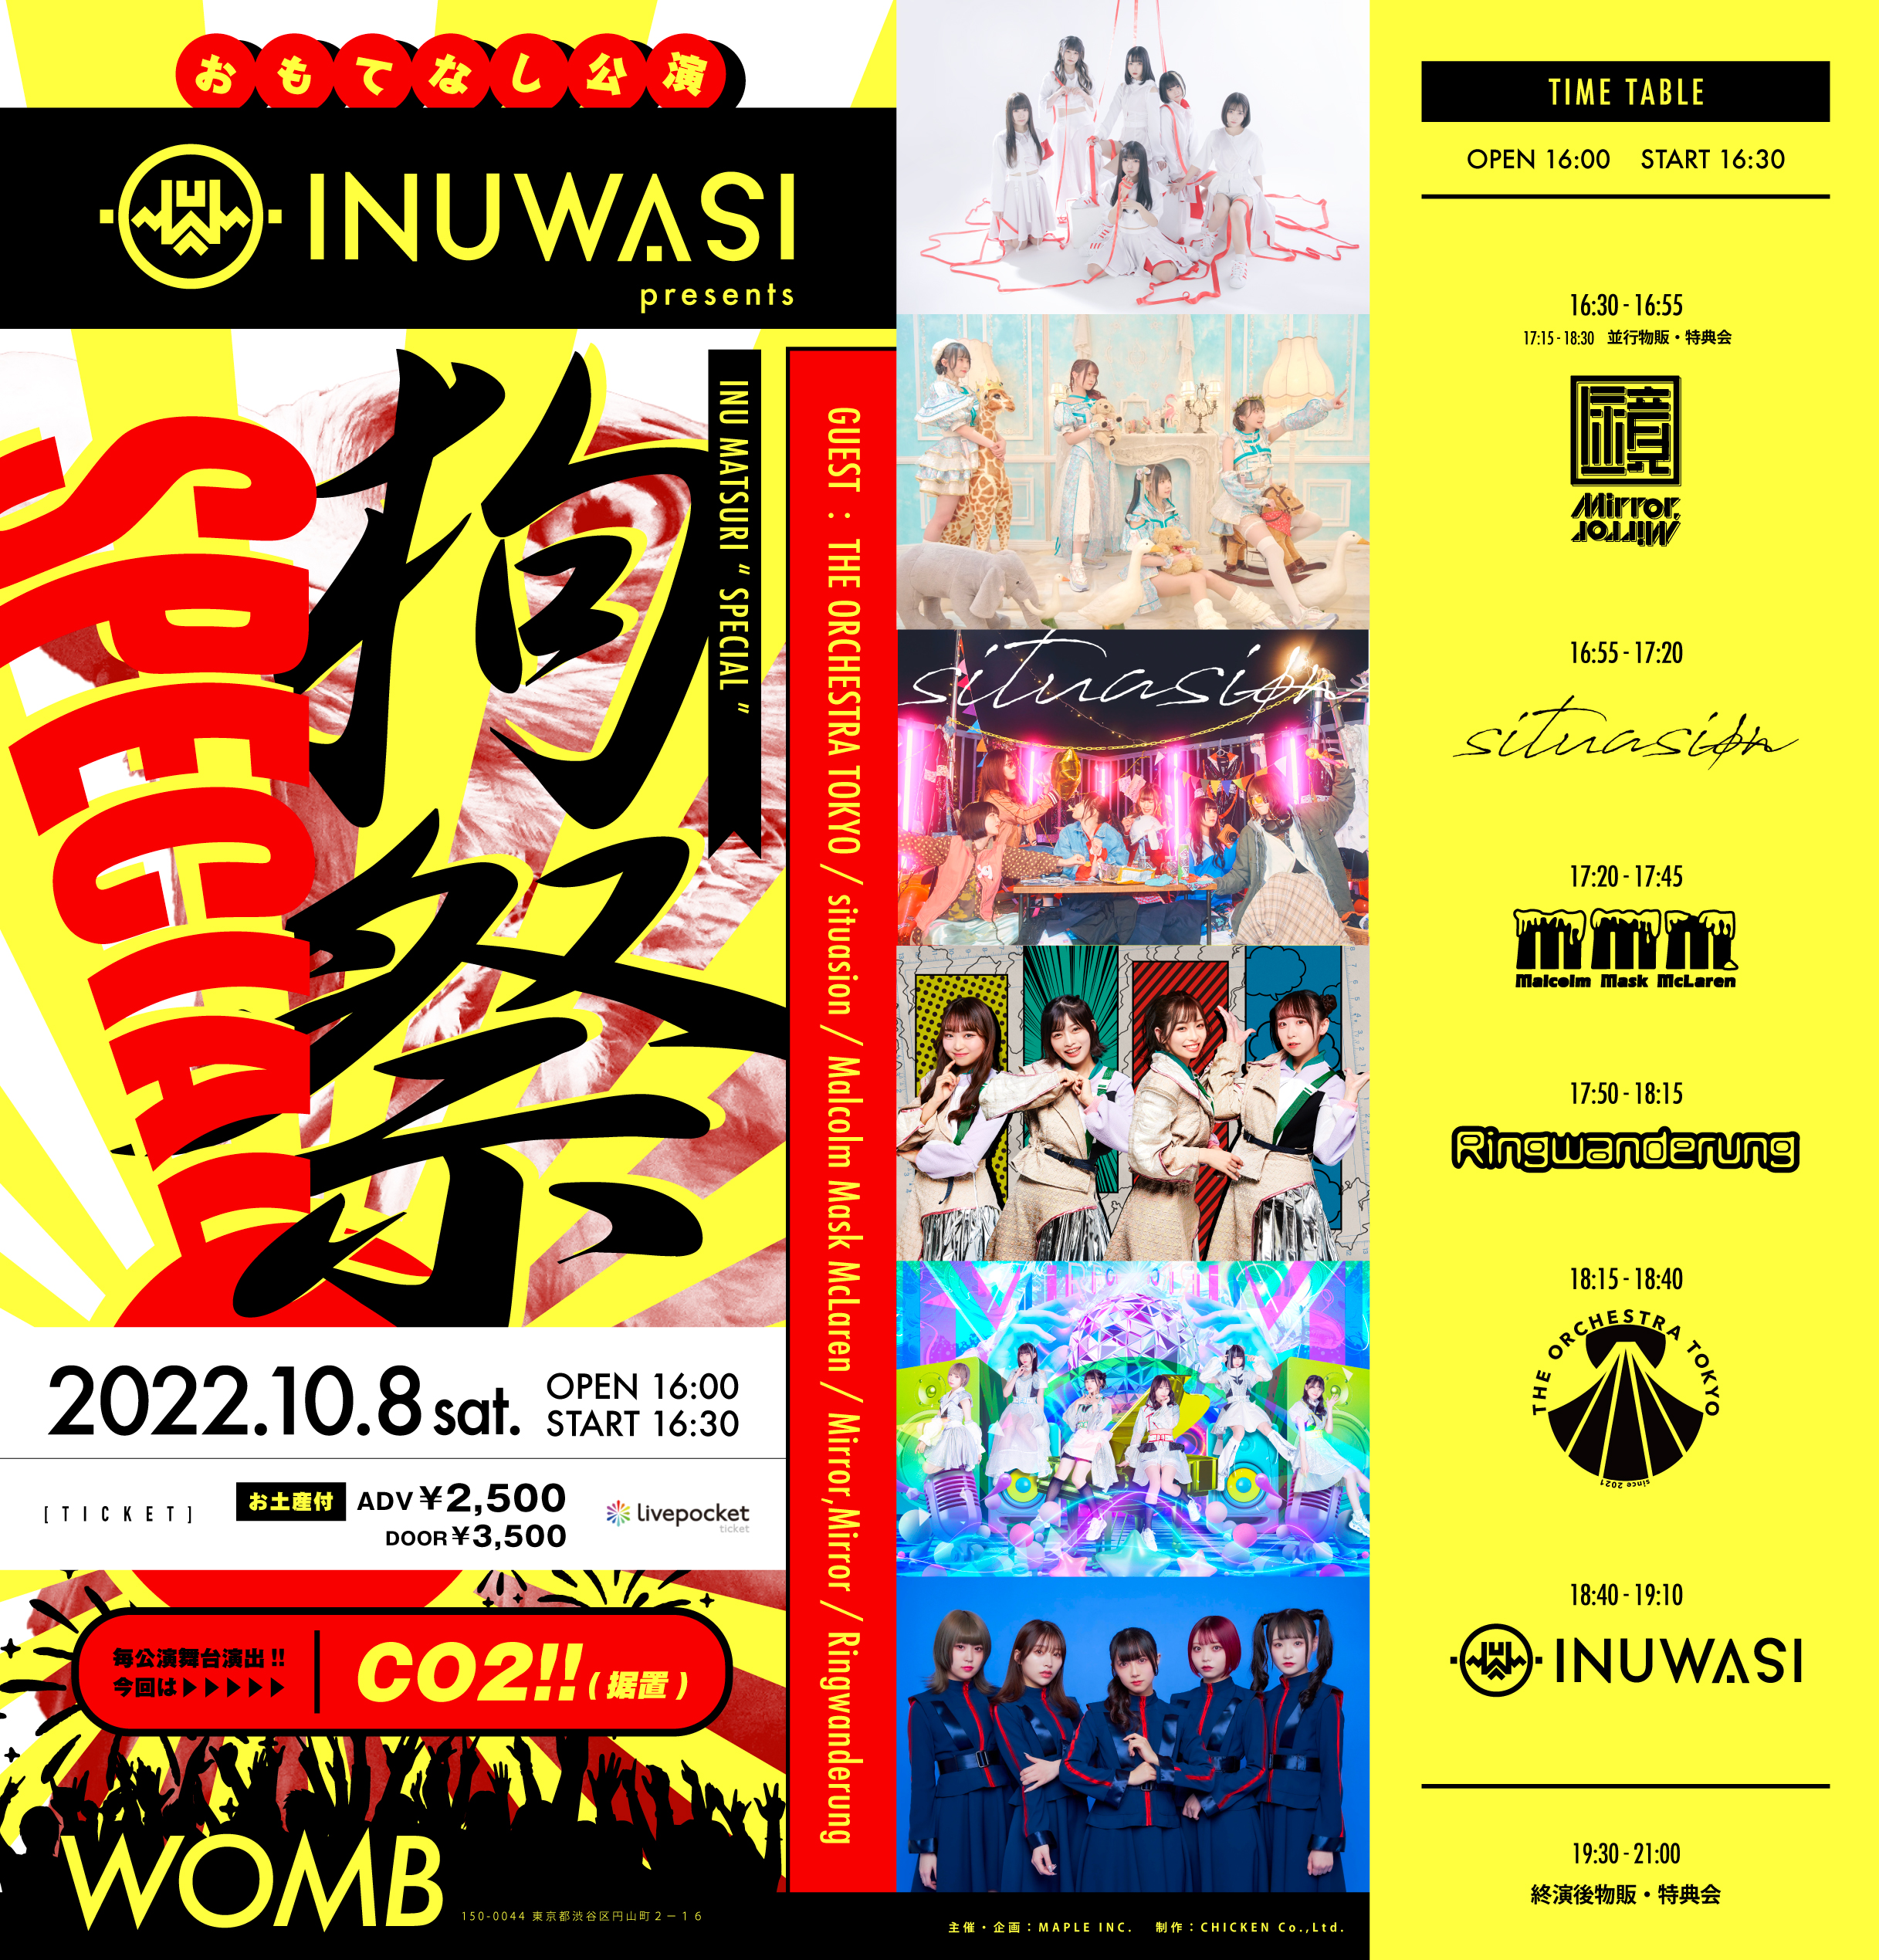 「INUWASI presents 狗祭SPECIAL」